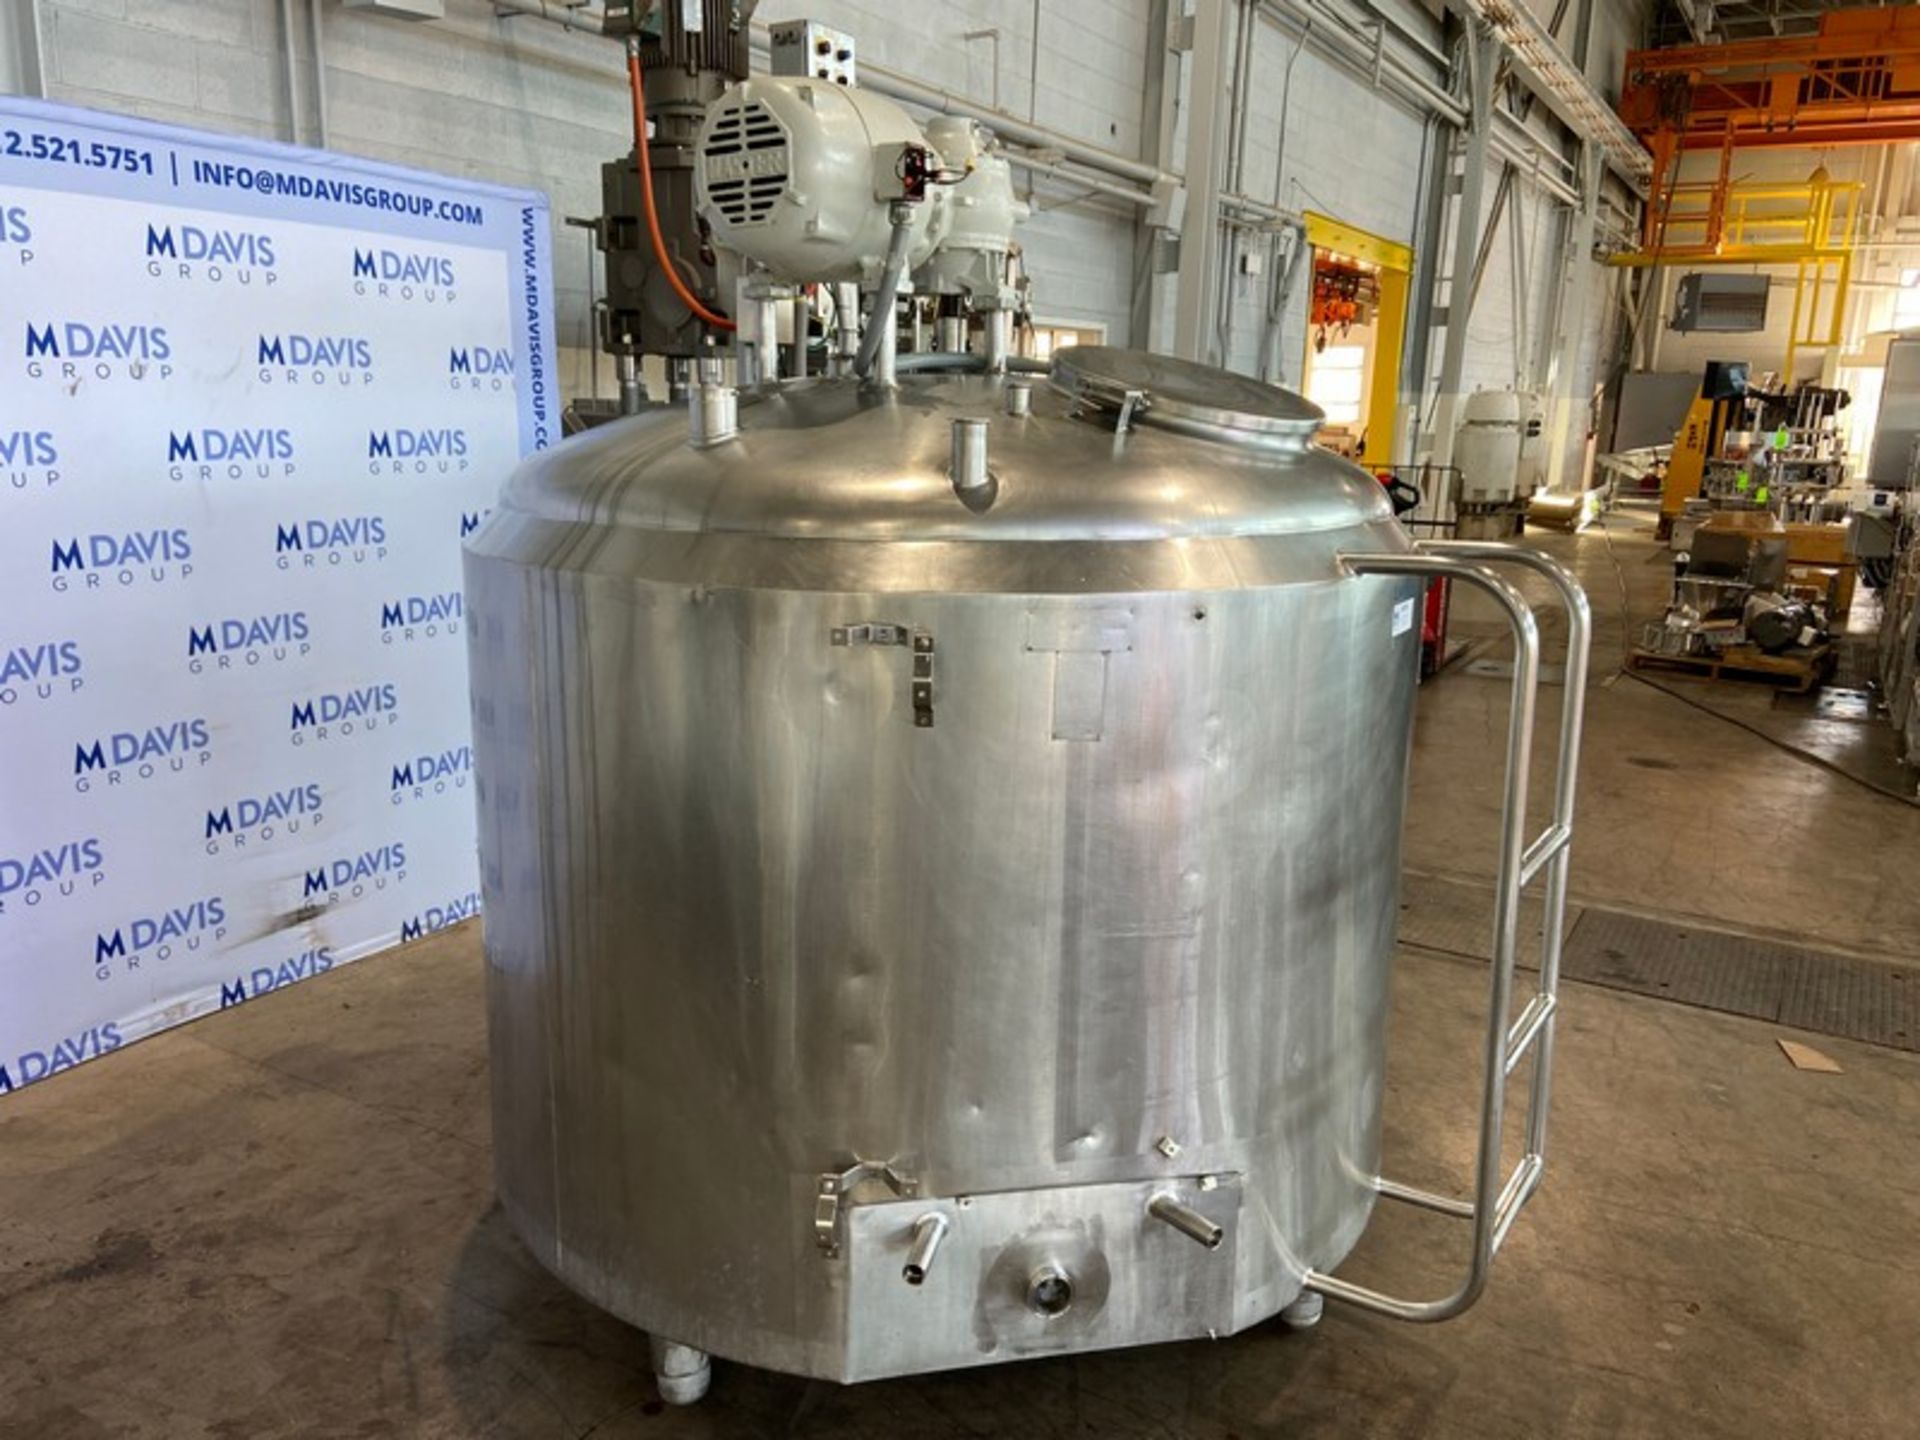 Cherry-Burrell S/S Batch Processor,-M/N FPDA, S/N 500-66-1381, with Top Mounted Agitation Motor, - Image 3 of 12